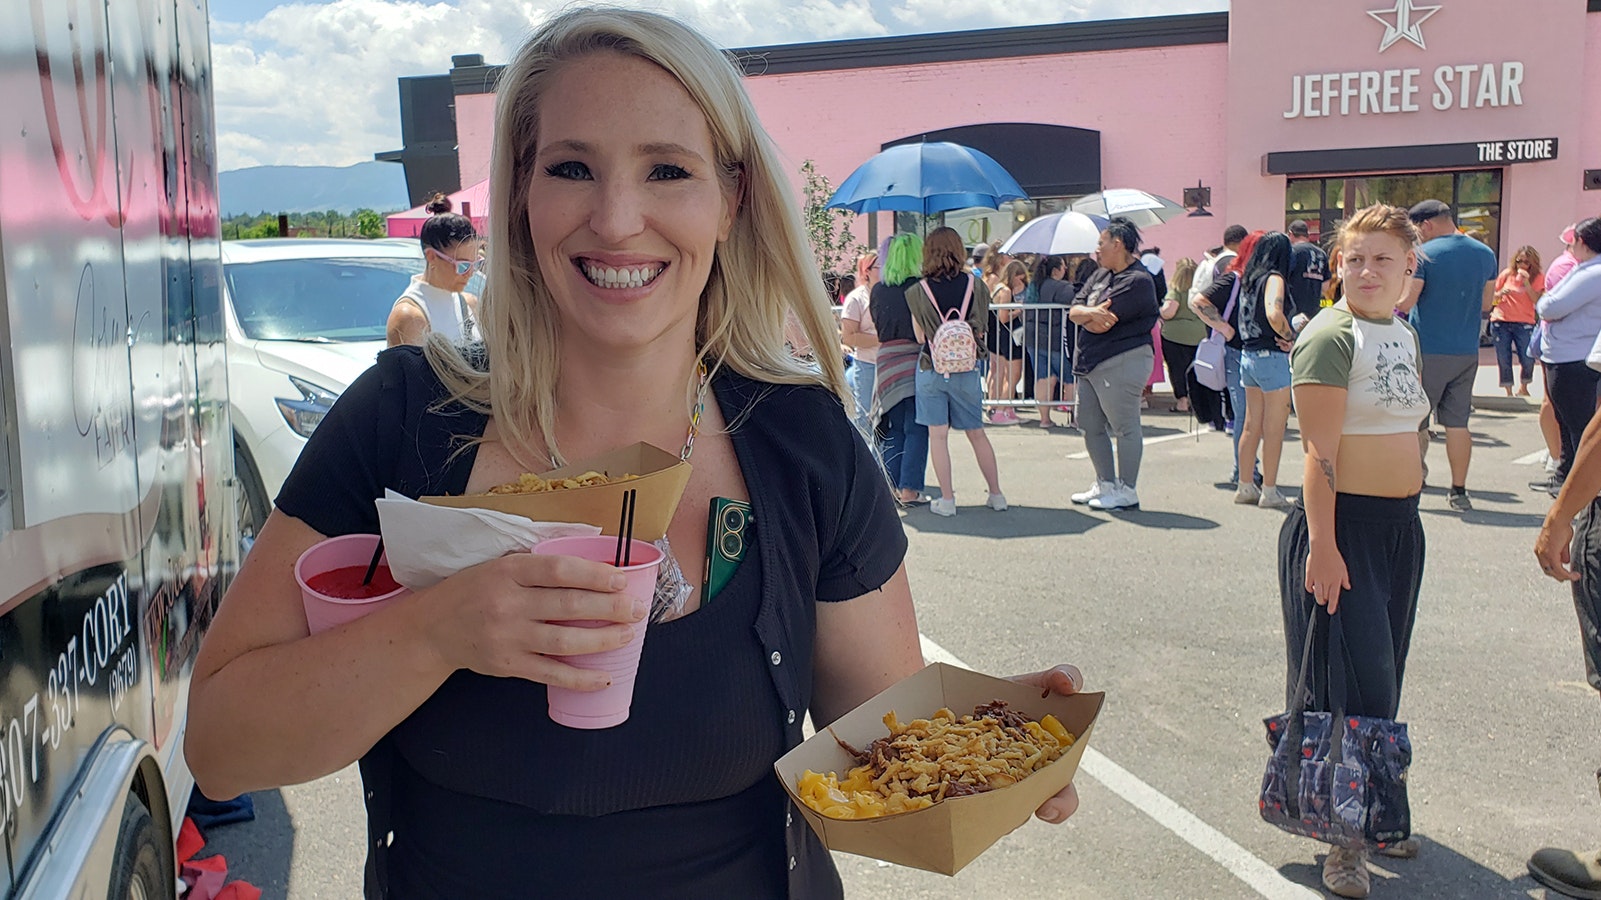 A friend held her place in line so Jenna Haworth could buy yak mac and cheese for them to eat while in line. They were still all the way back to the splash pad area of the line at midday.